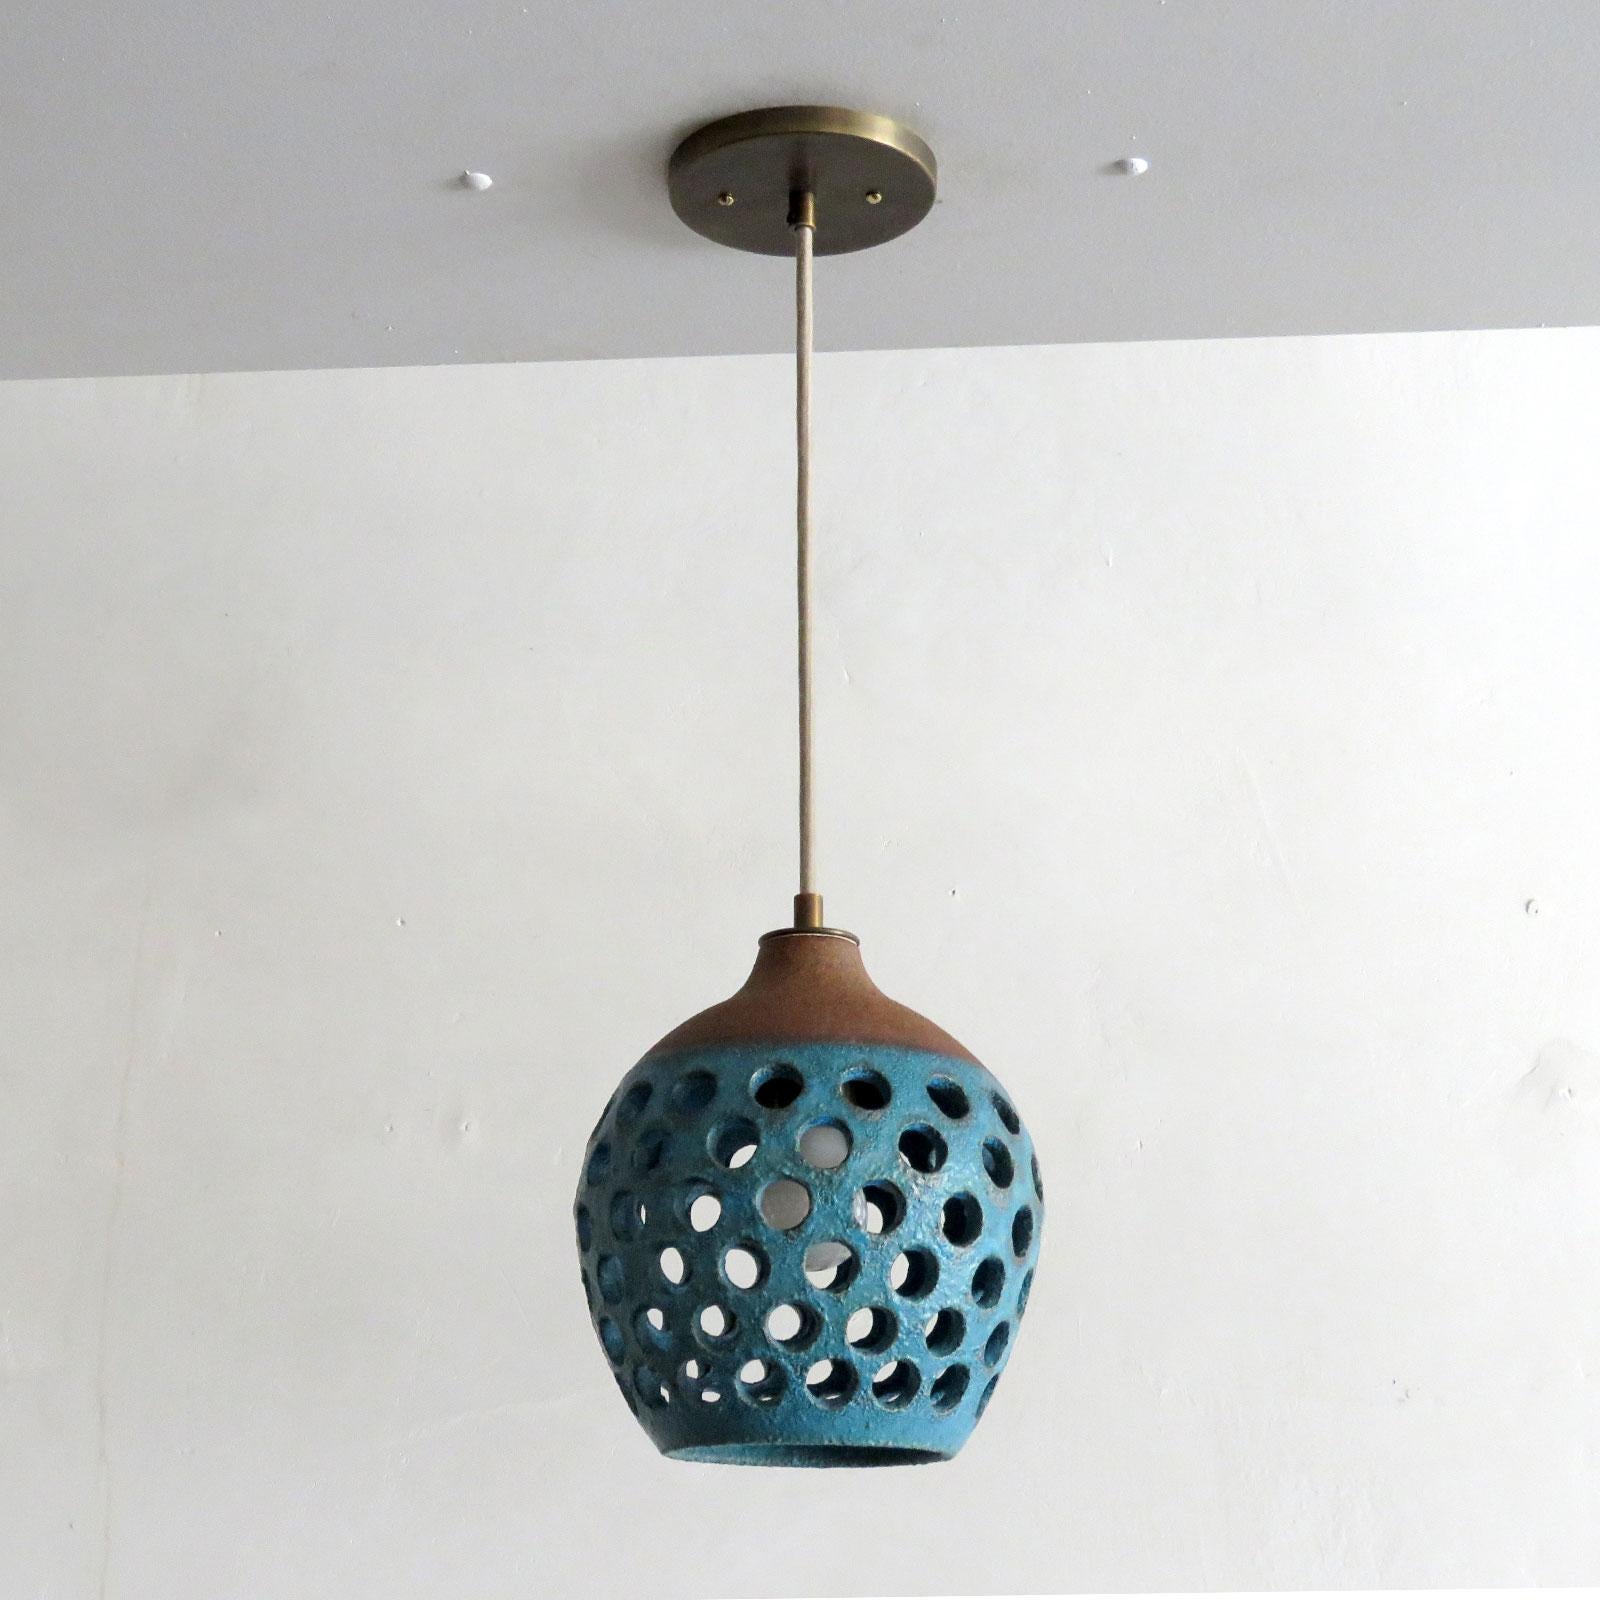 Wonderful petite ceramic pendant light No.1202, designed and handcrafted by Los Angeles based ceramicist Heather Levine. High fired stoneware with matte Turquoise glaze on cork colored clay body with decorative shapes cut out to expose light in